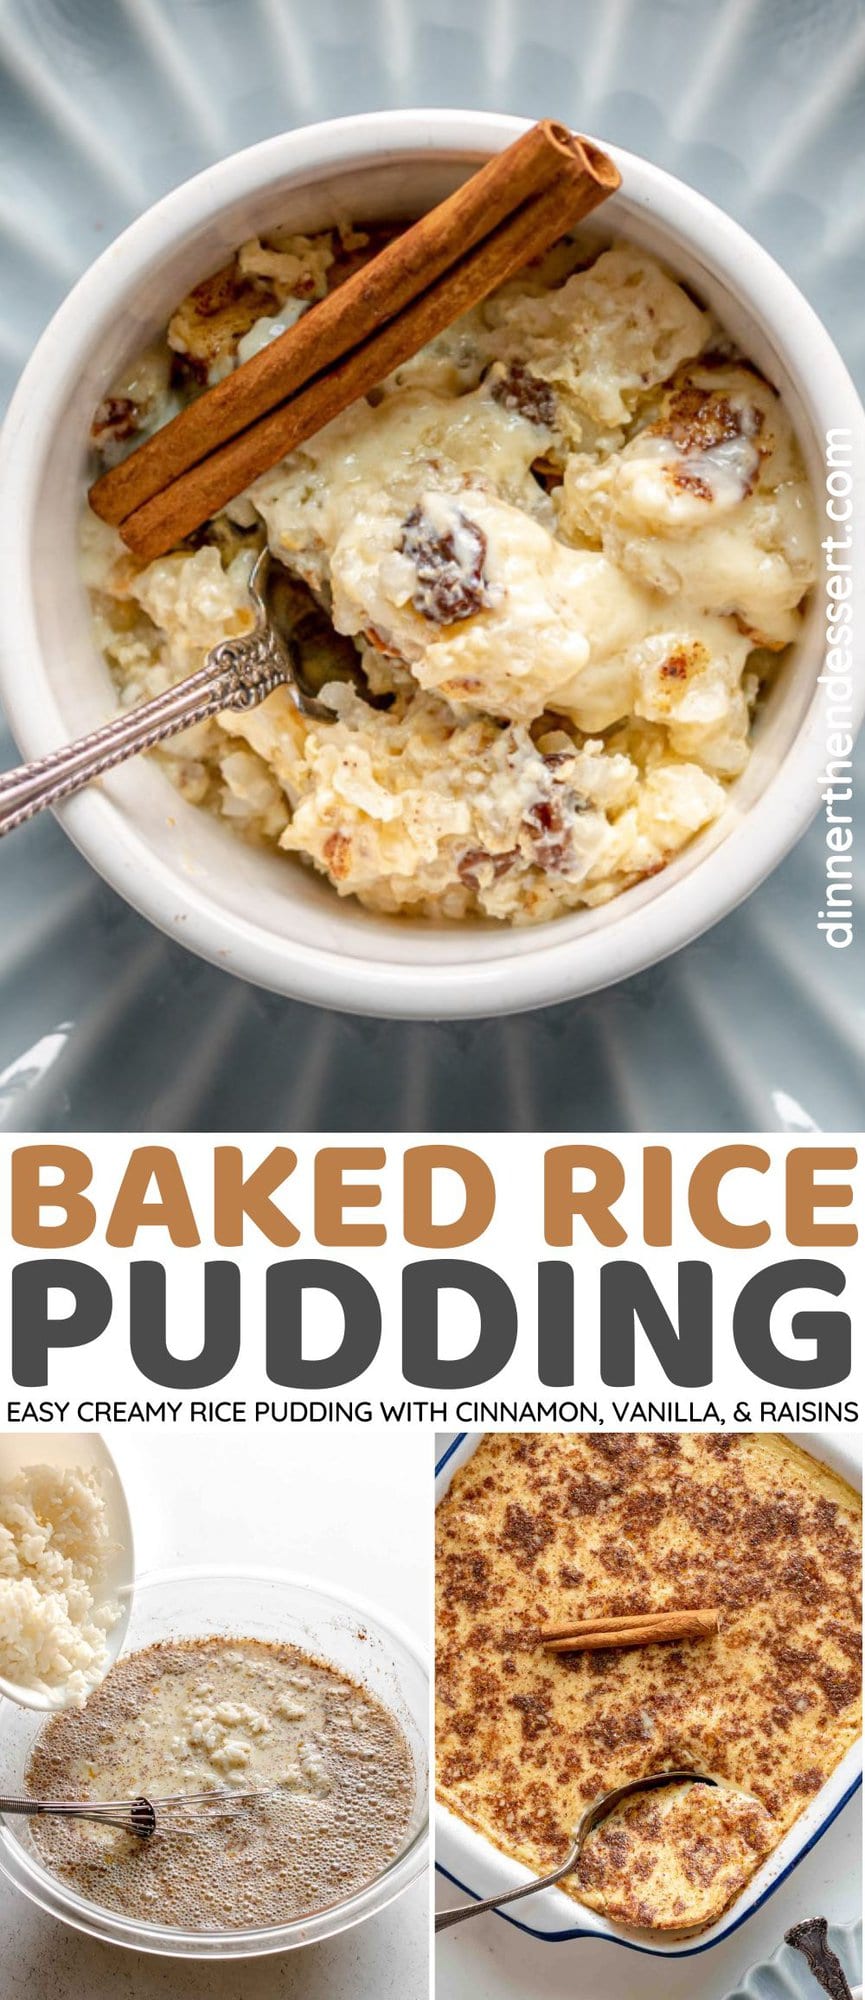 Baked Rice Pudding preparation and finished pudding collage